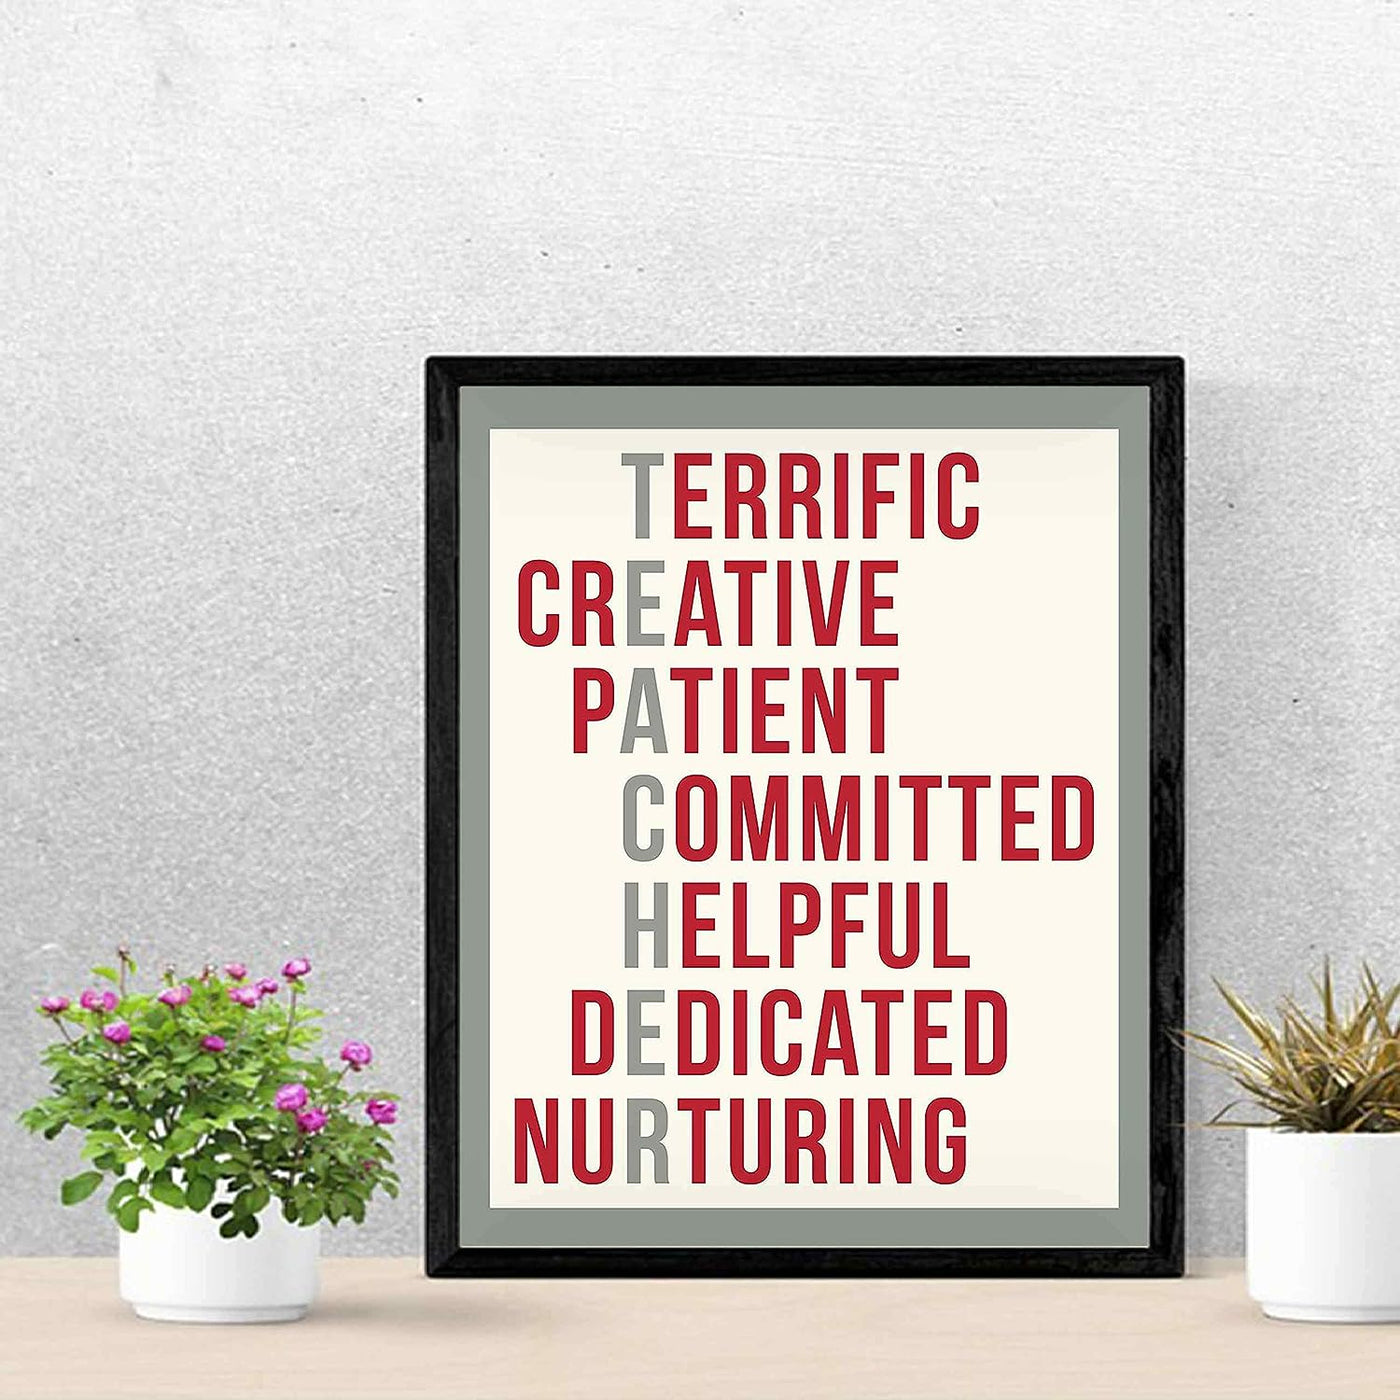 A Teacher Is. Inspirational Acronym Sign -11 x 14" Word Art Wall Print-Ready to Frame. Modern Typographic Design. Motivational Home-Office-Classroom Decor. Great Gift of Gratitude & Appreciation!